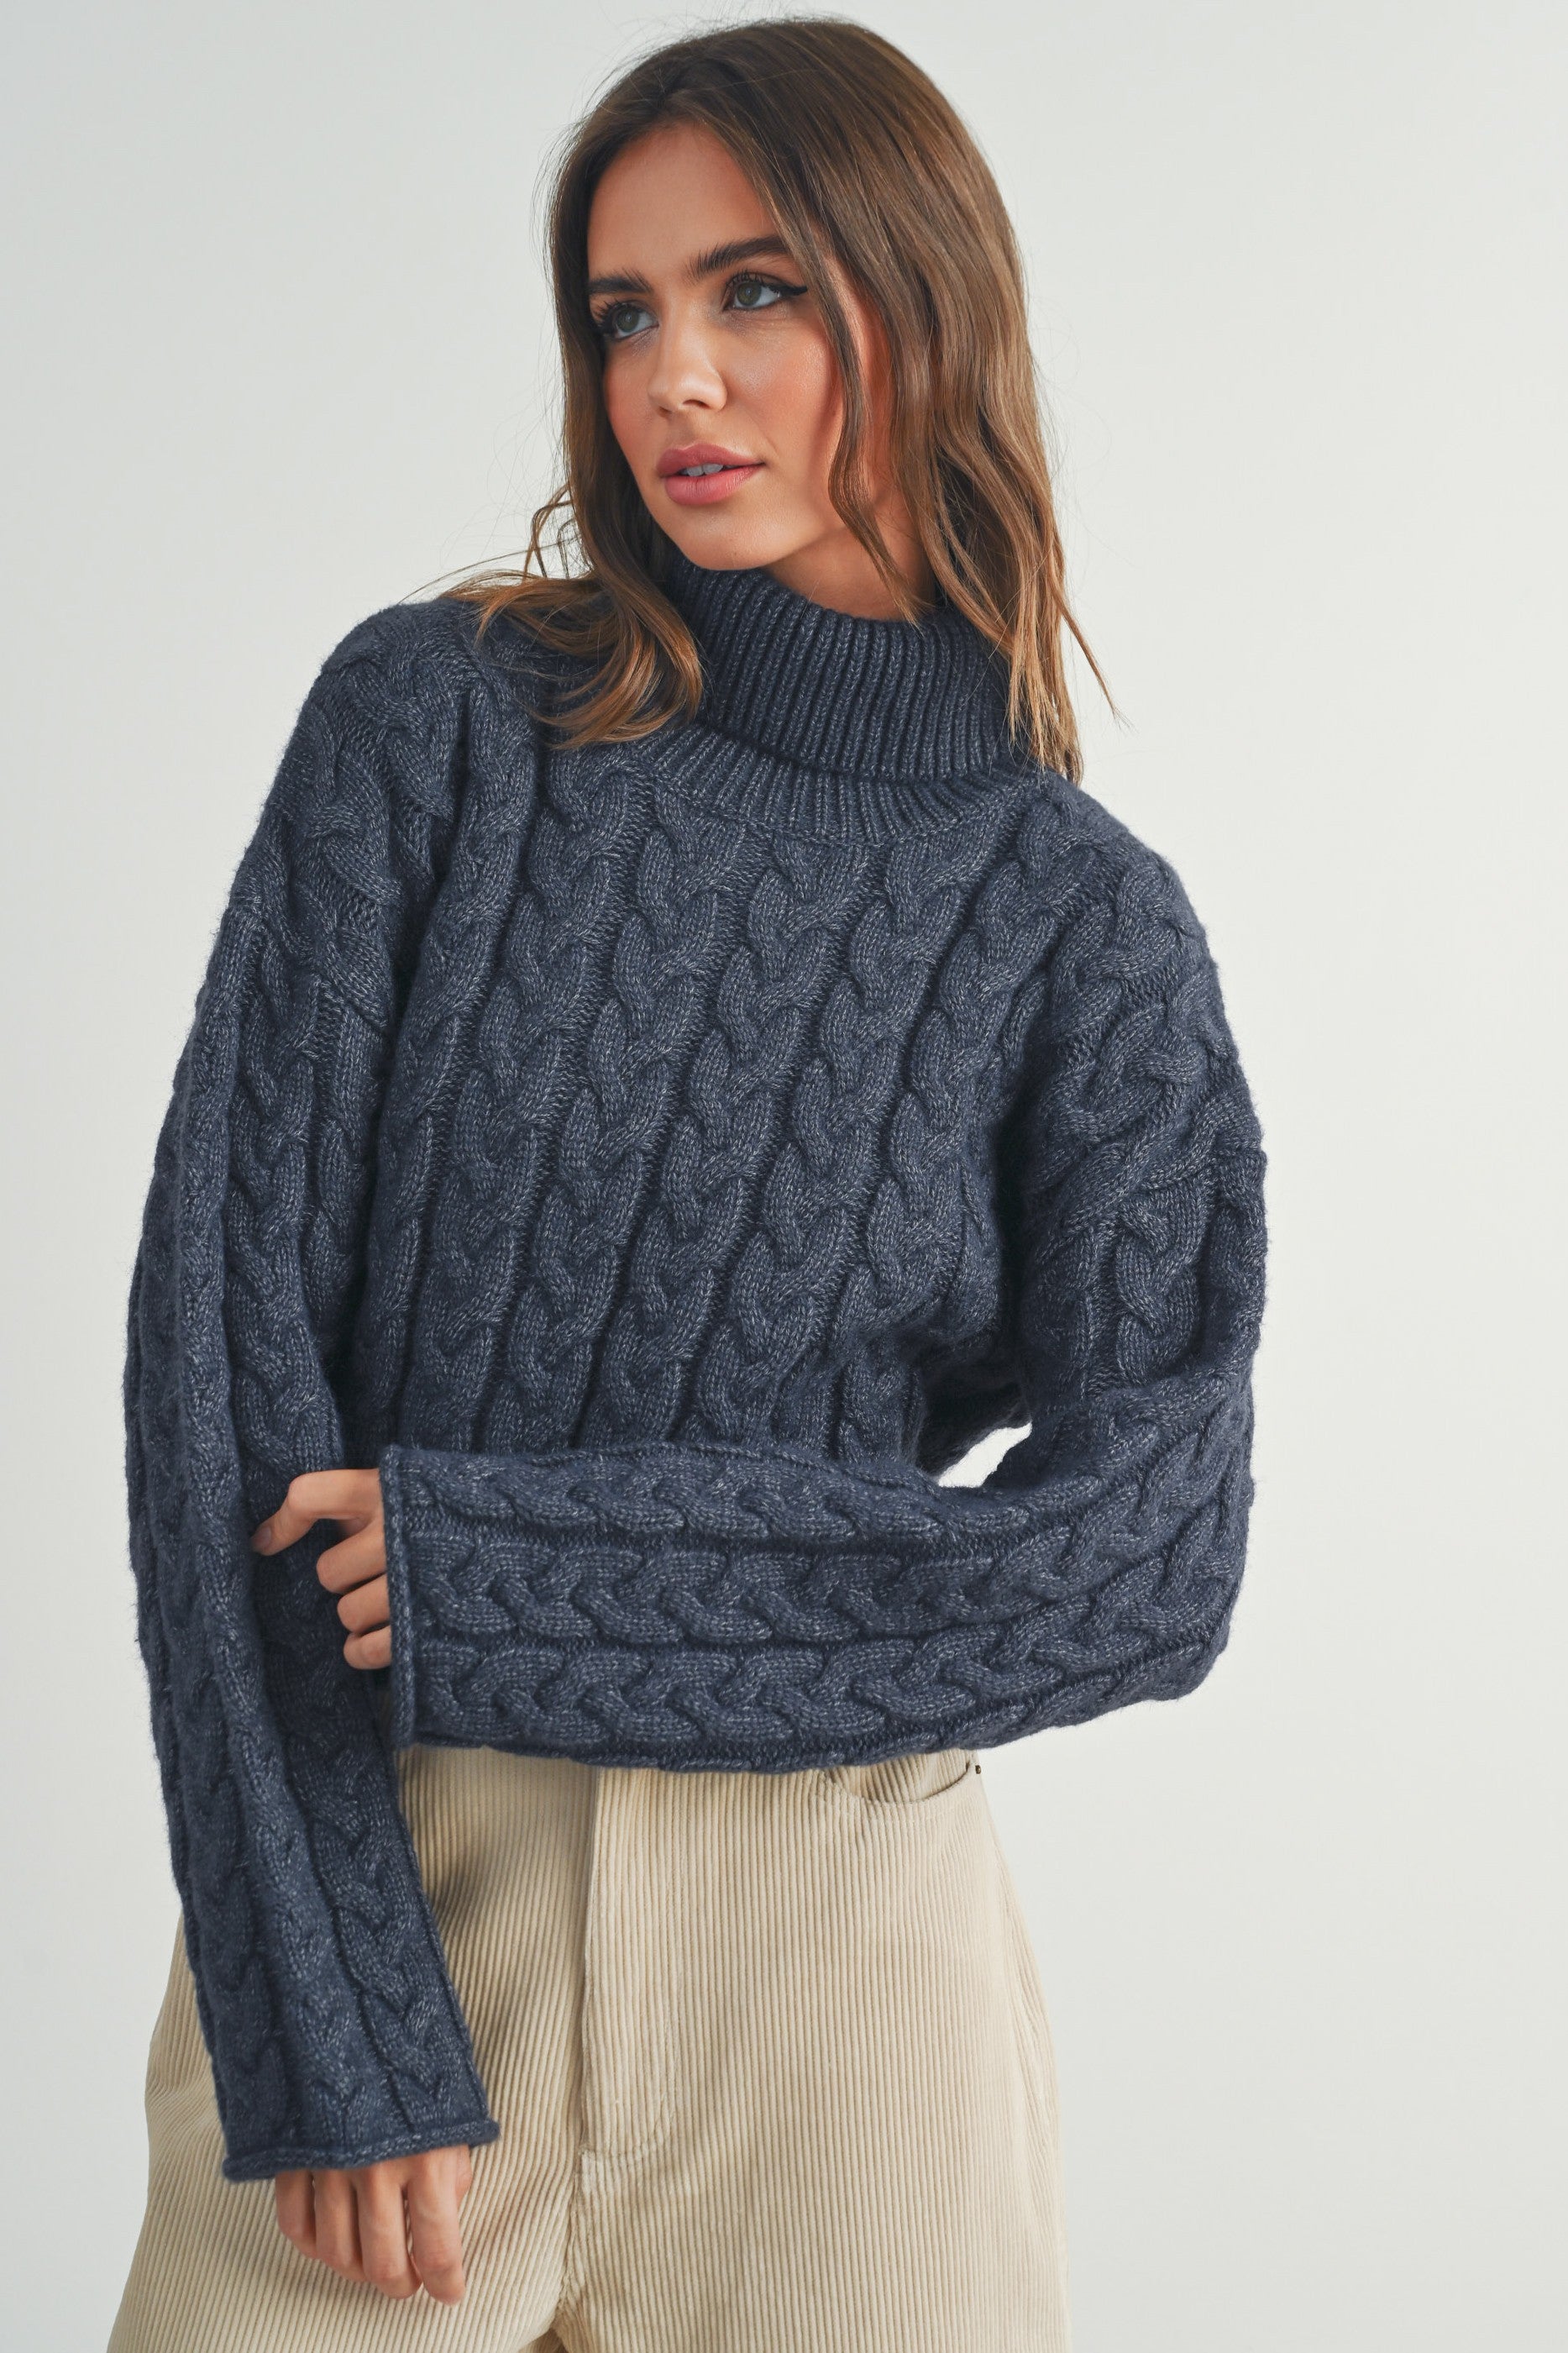 Braided Turtleneck - Out of the Blue